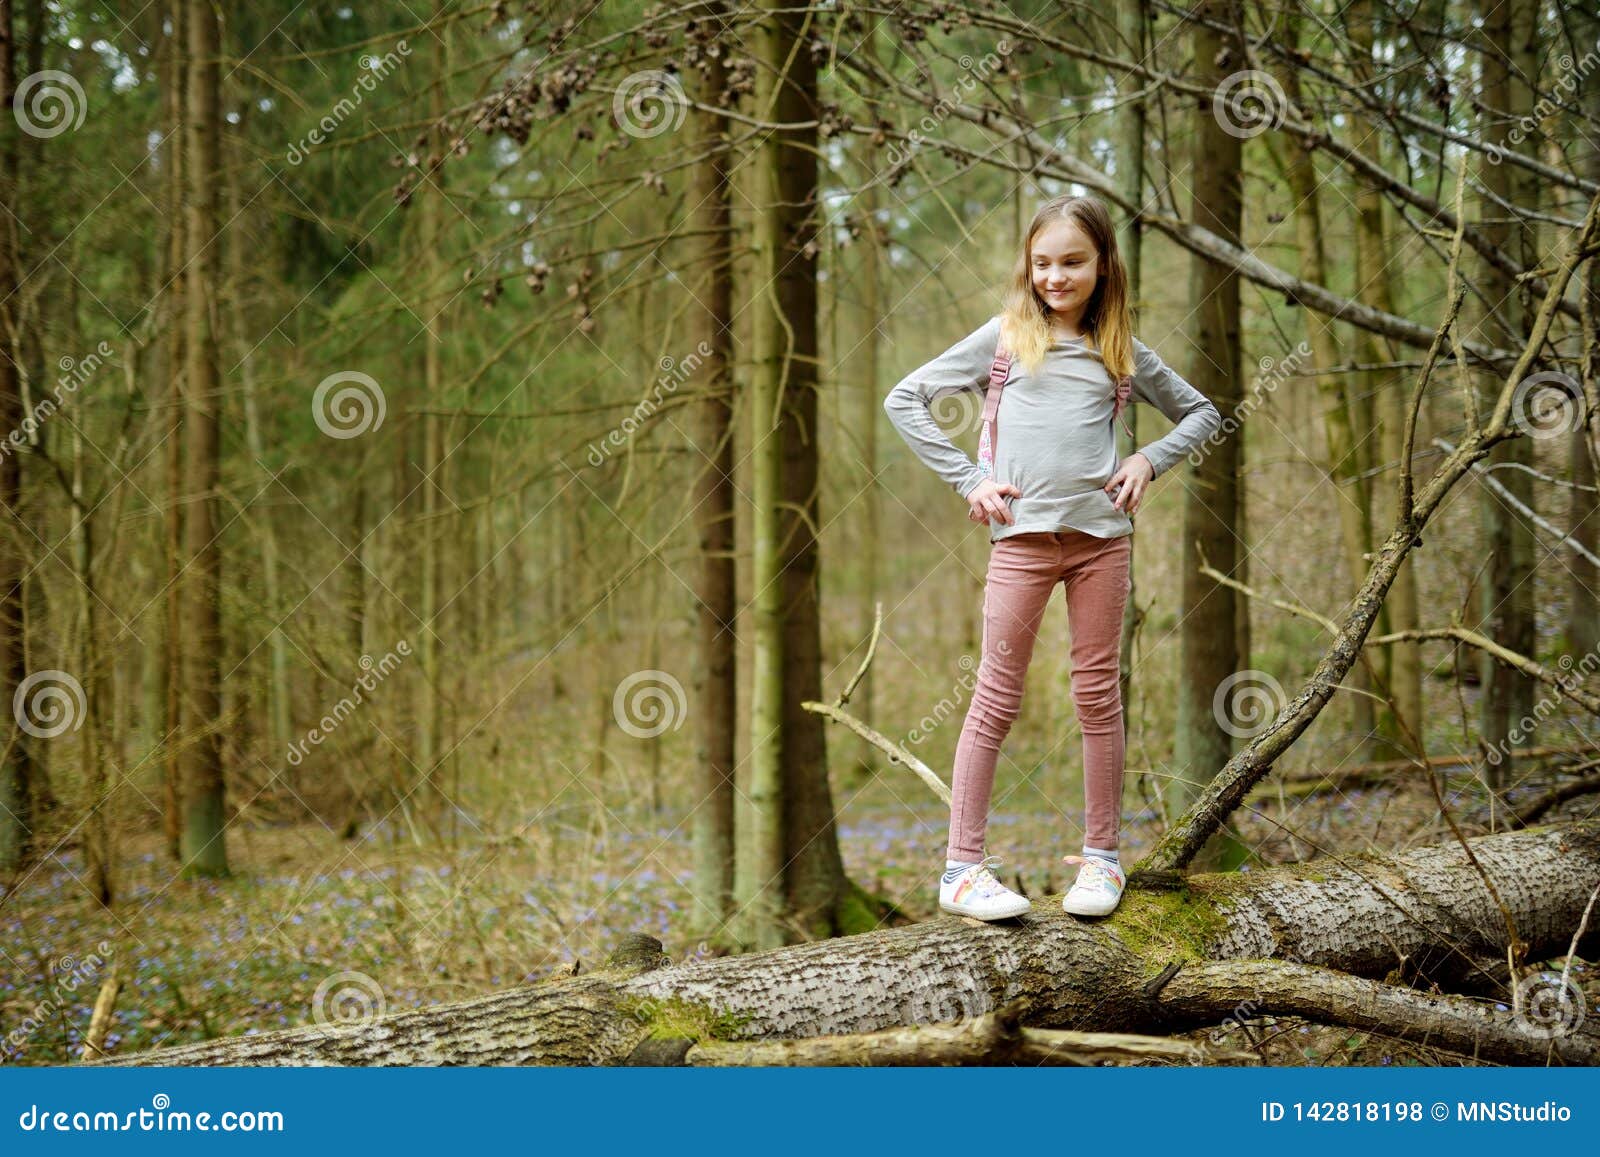 Cute Young Girl Having Fun During Forest Hike On Beau